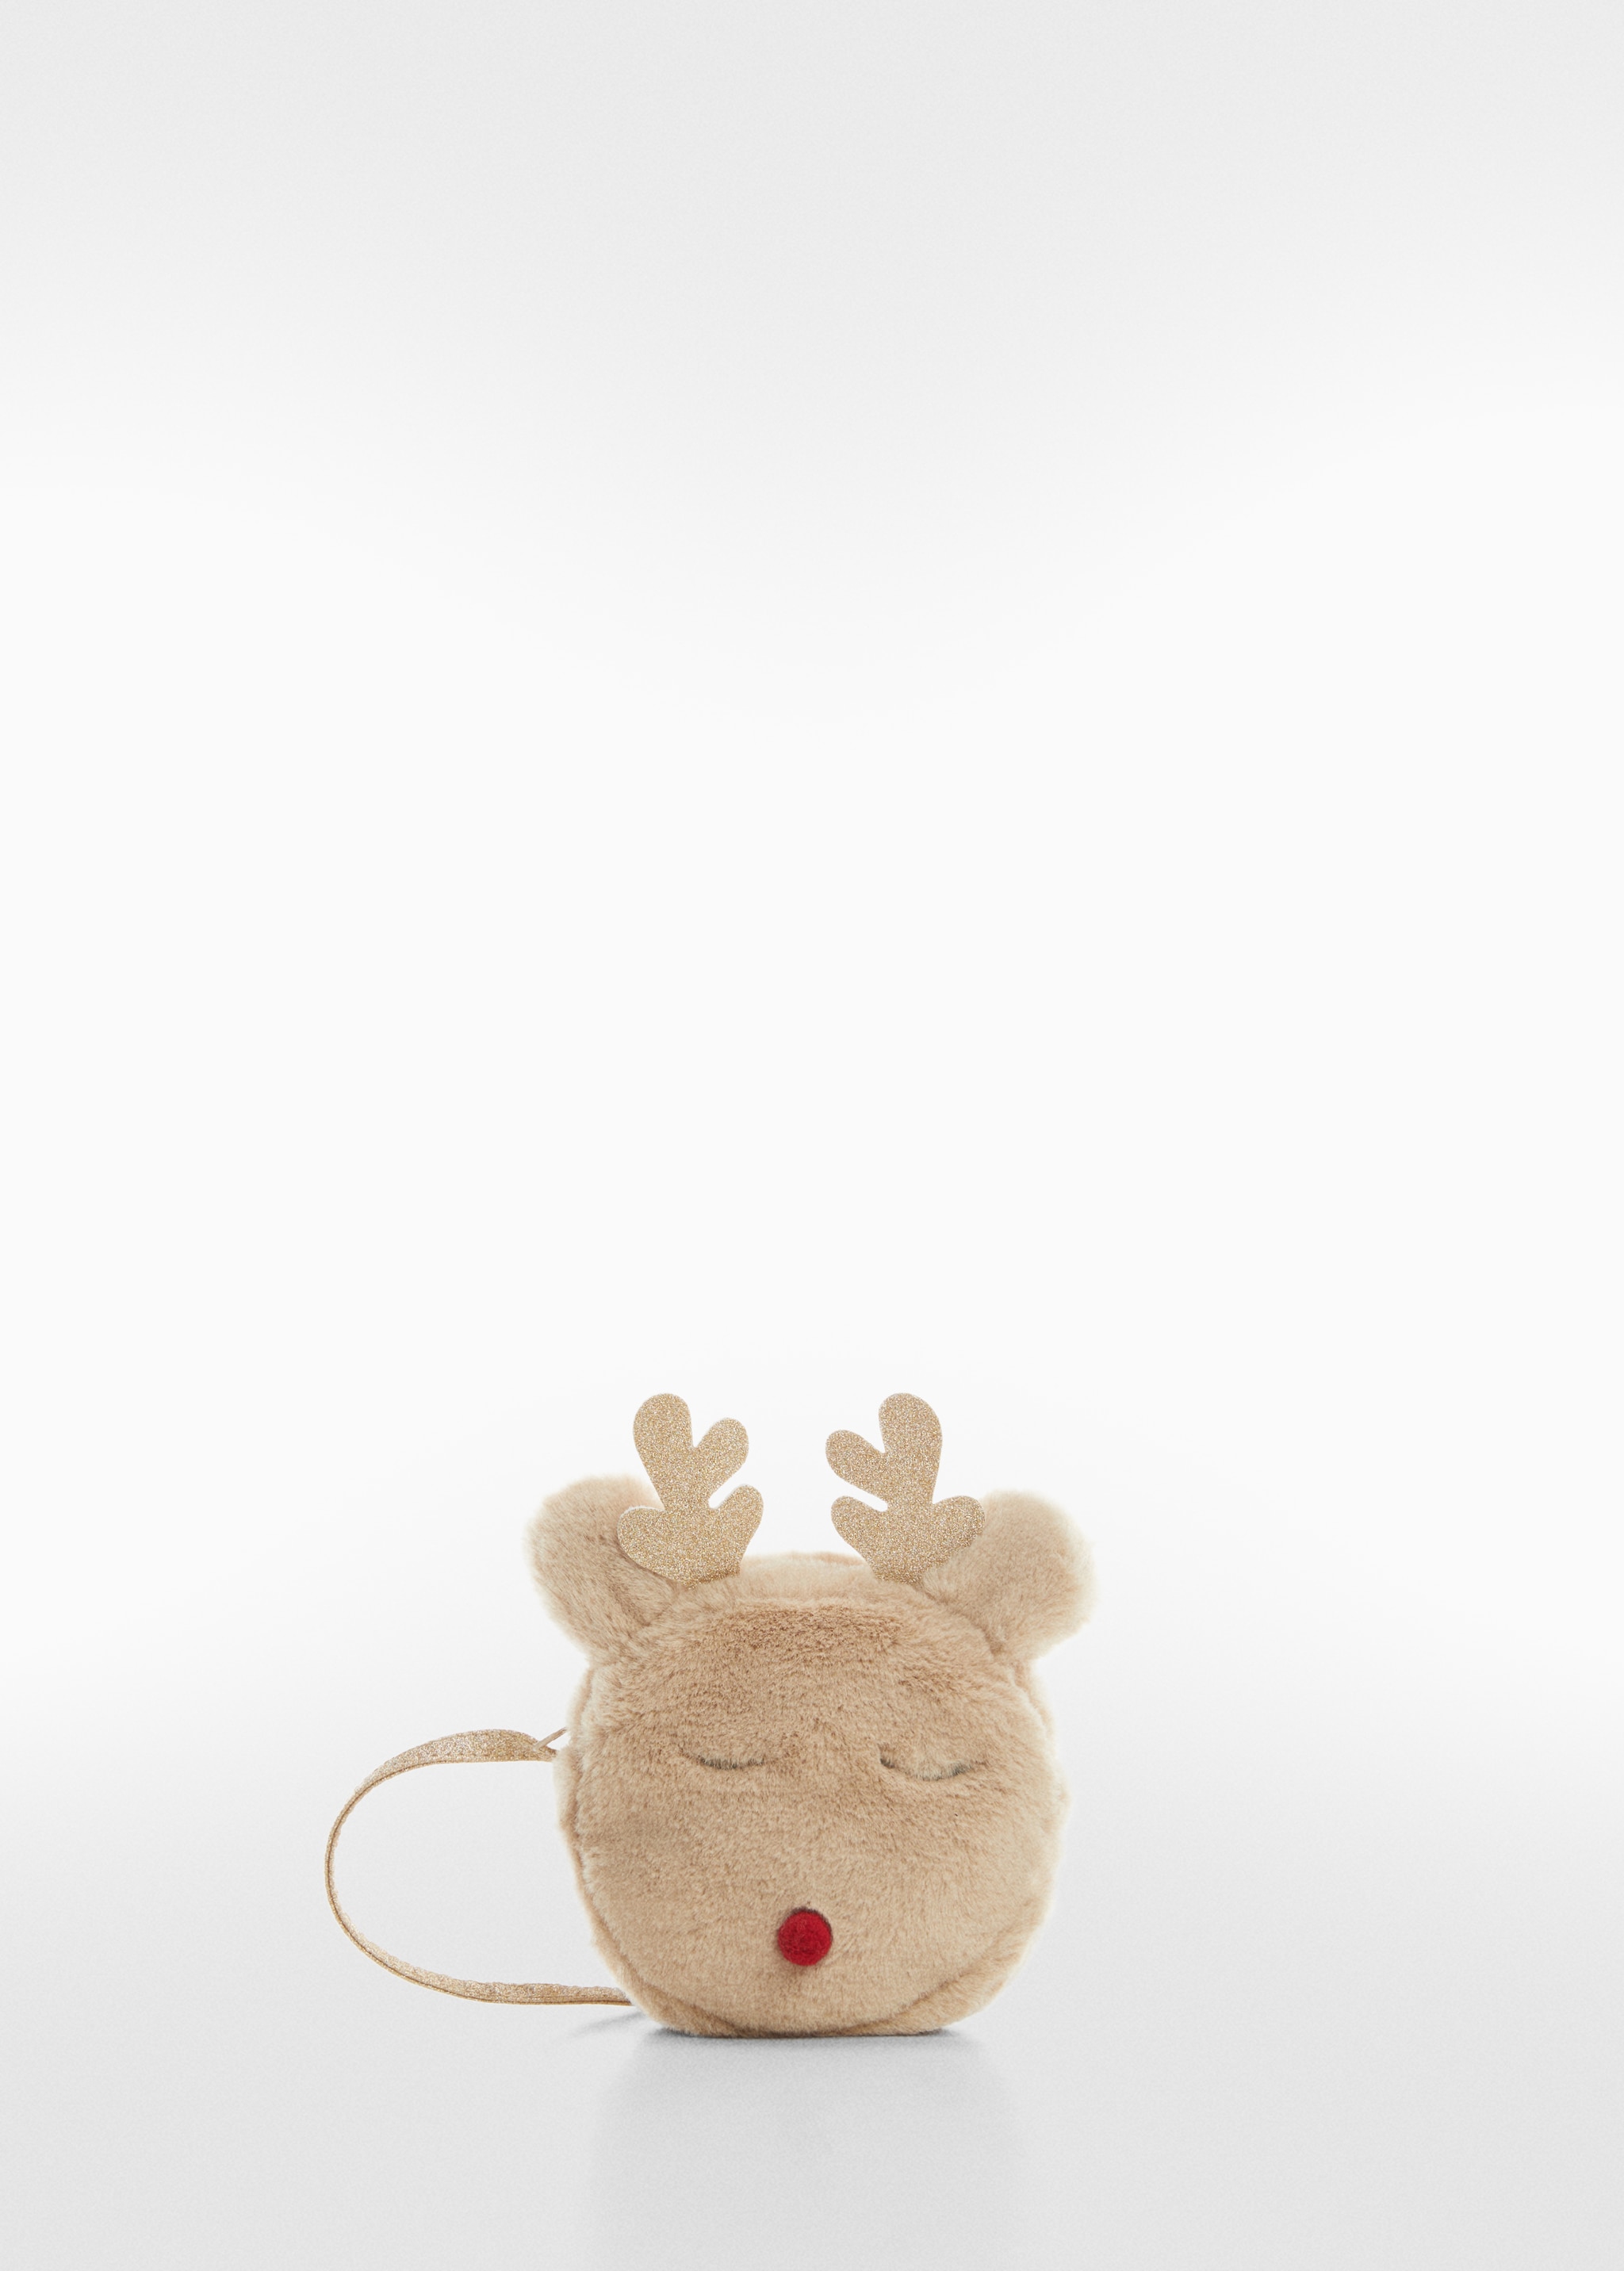 Reindeer bag - Article without model